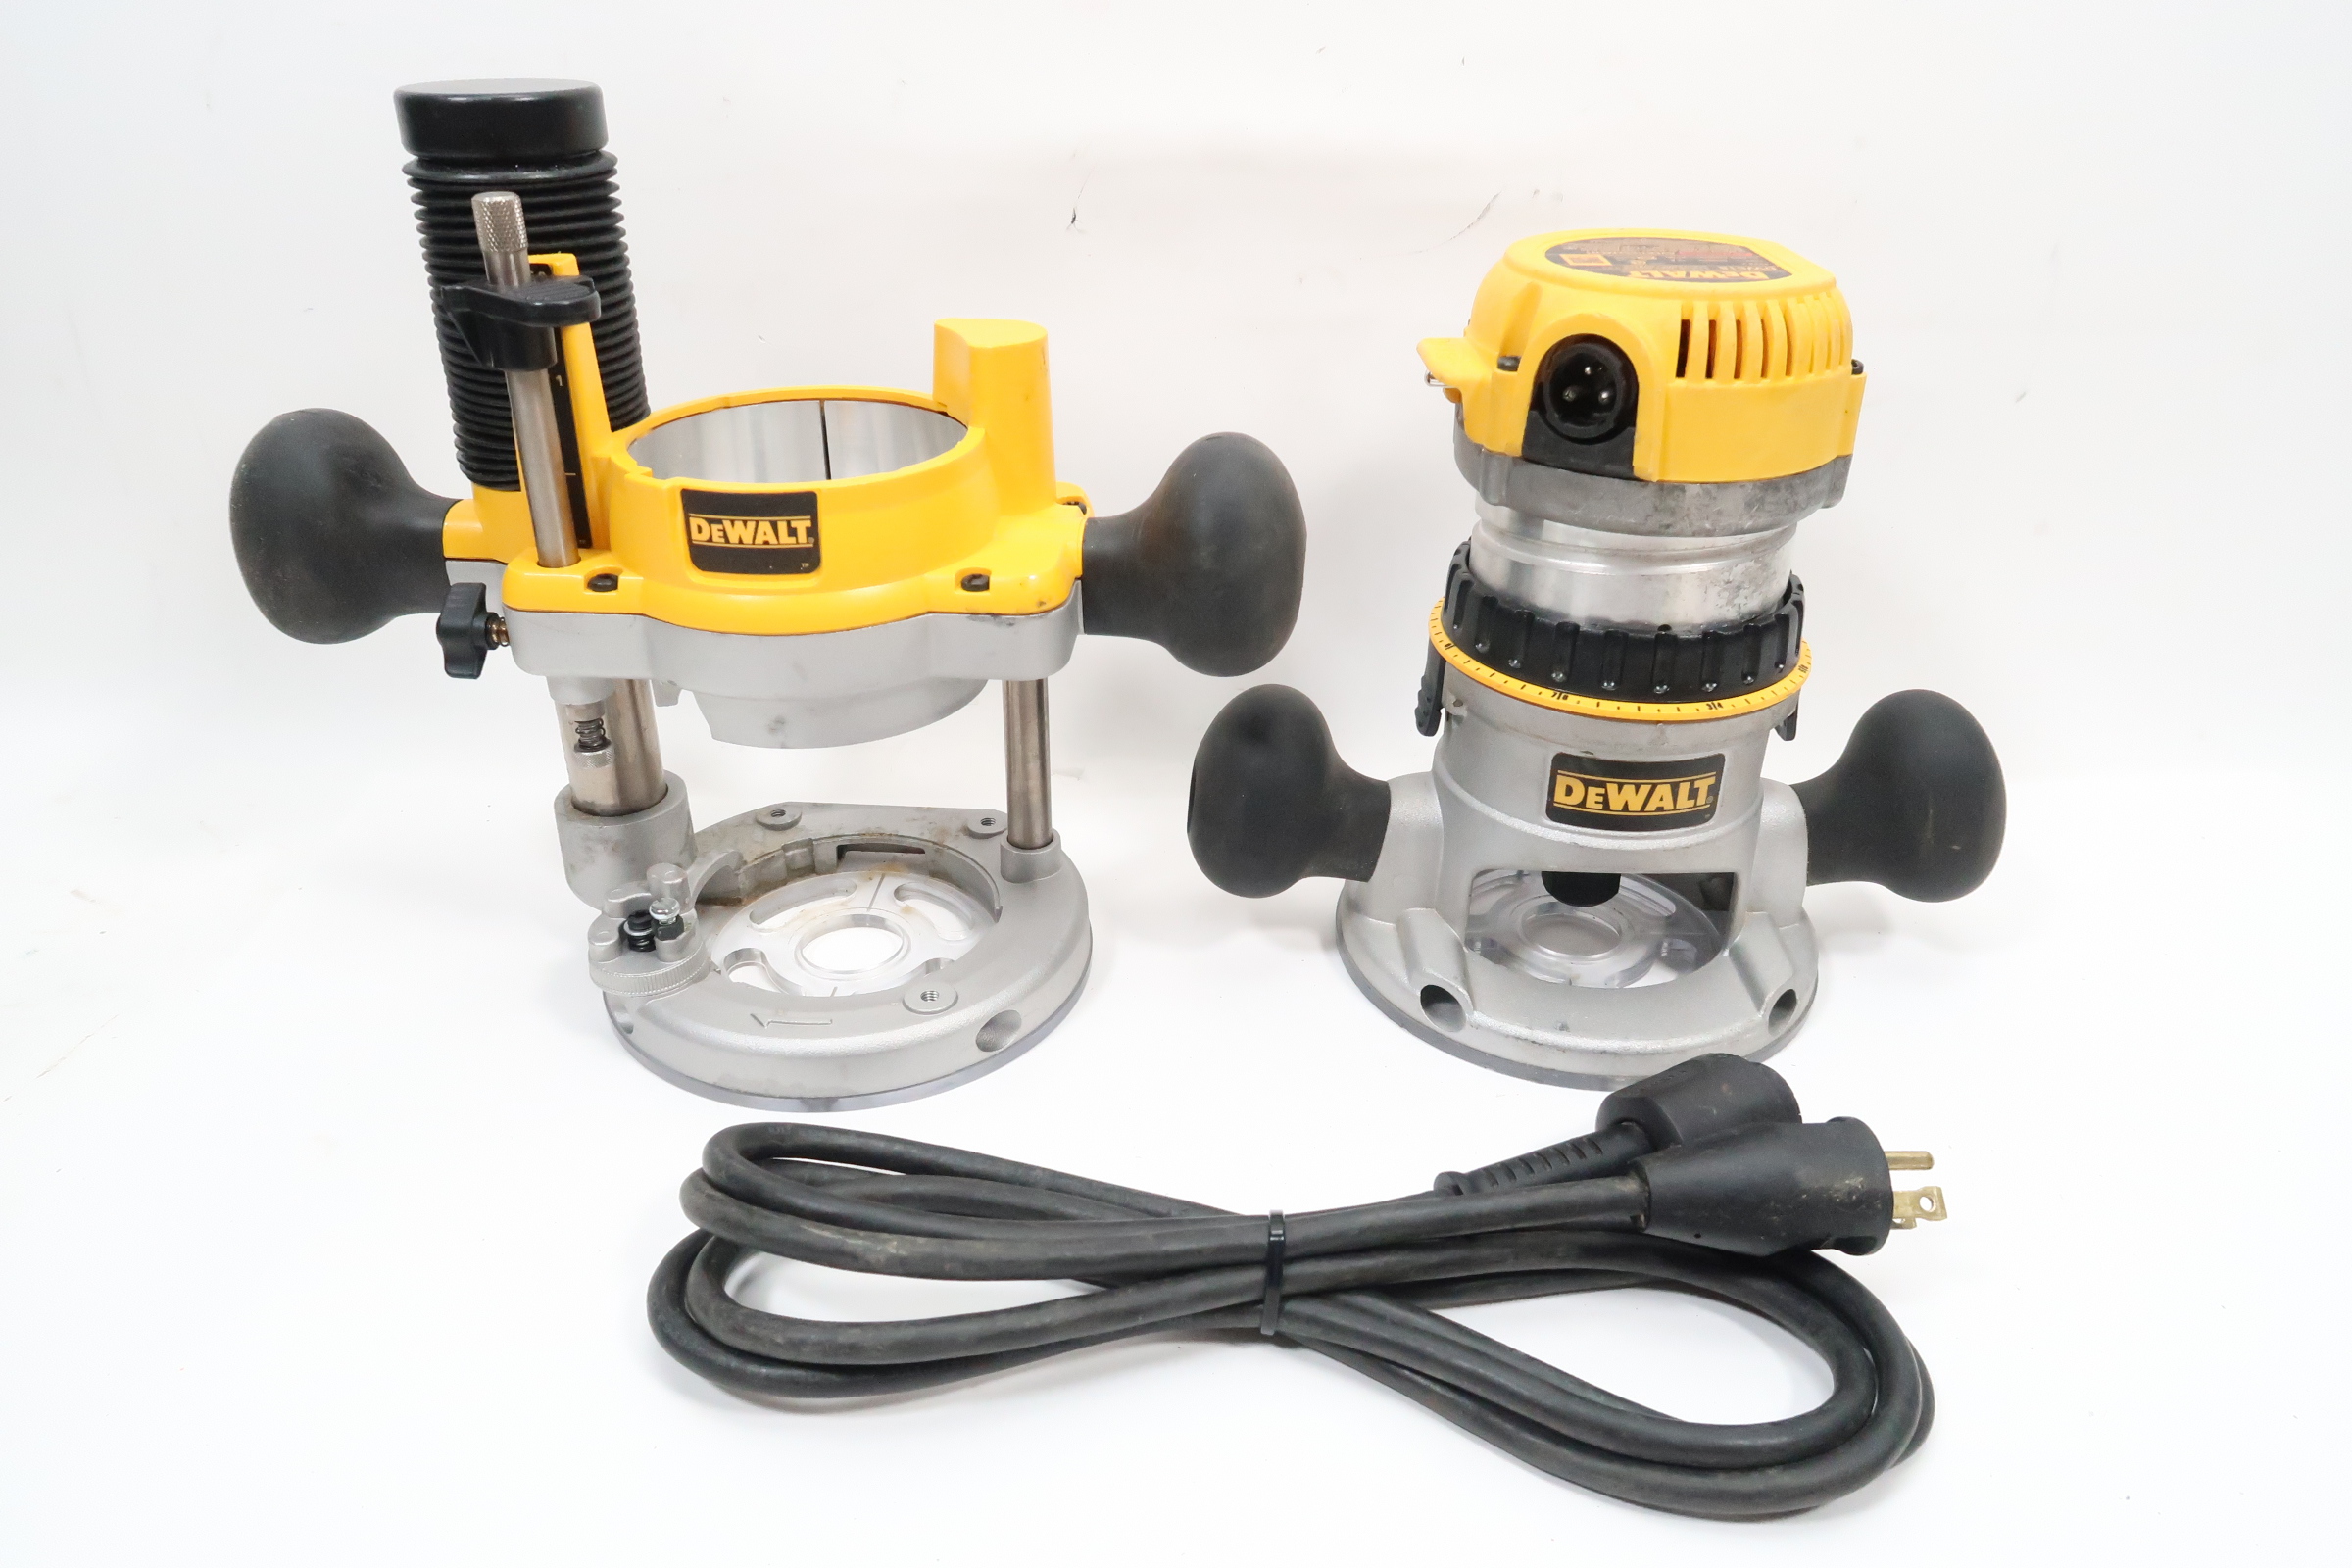 DeWalt DW618 12 Amp Corded 2-1/4 Horsepower Variable Speed Fixed Base Router